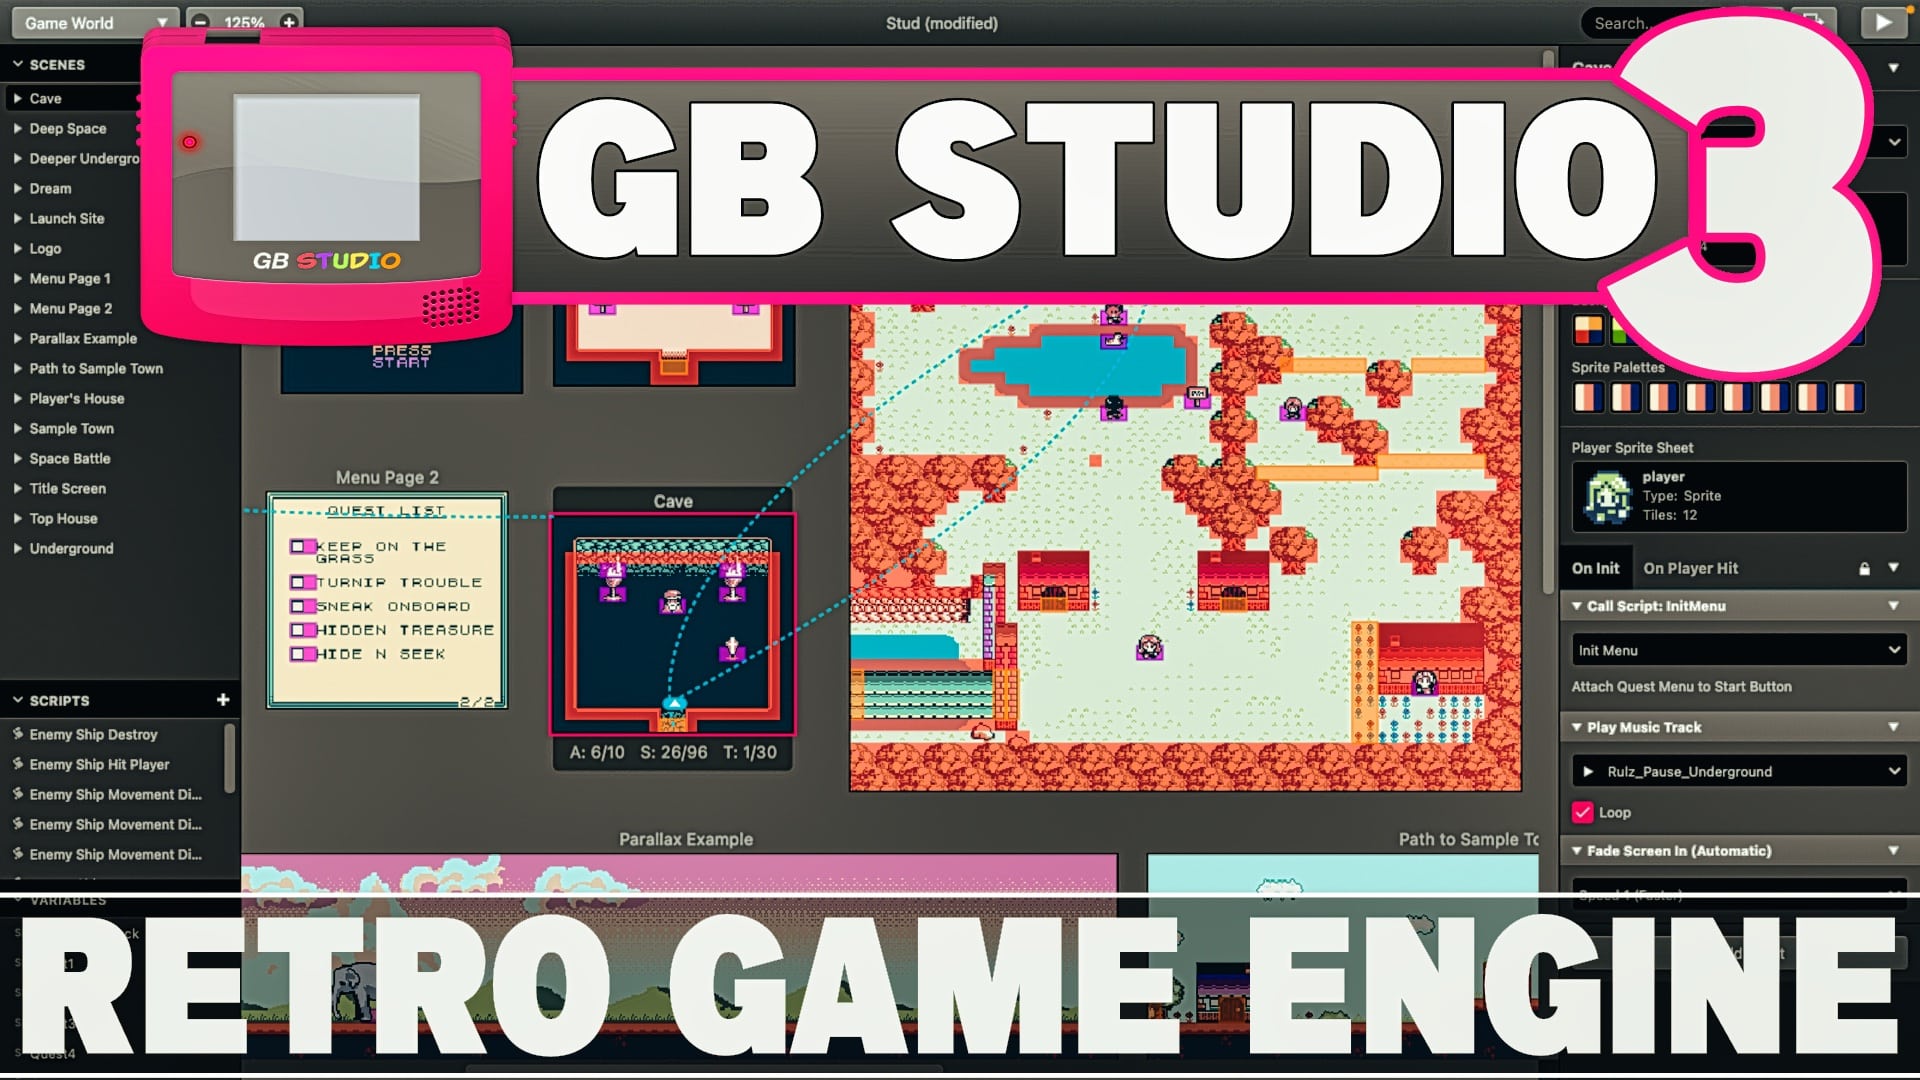 Playing GB Studio games on mobile with itch.io browser is pretty